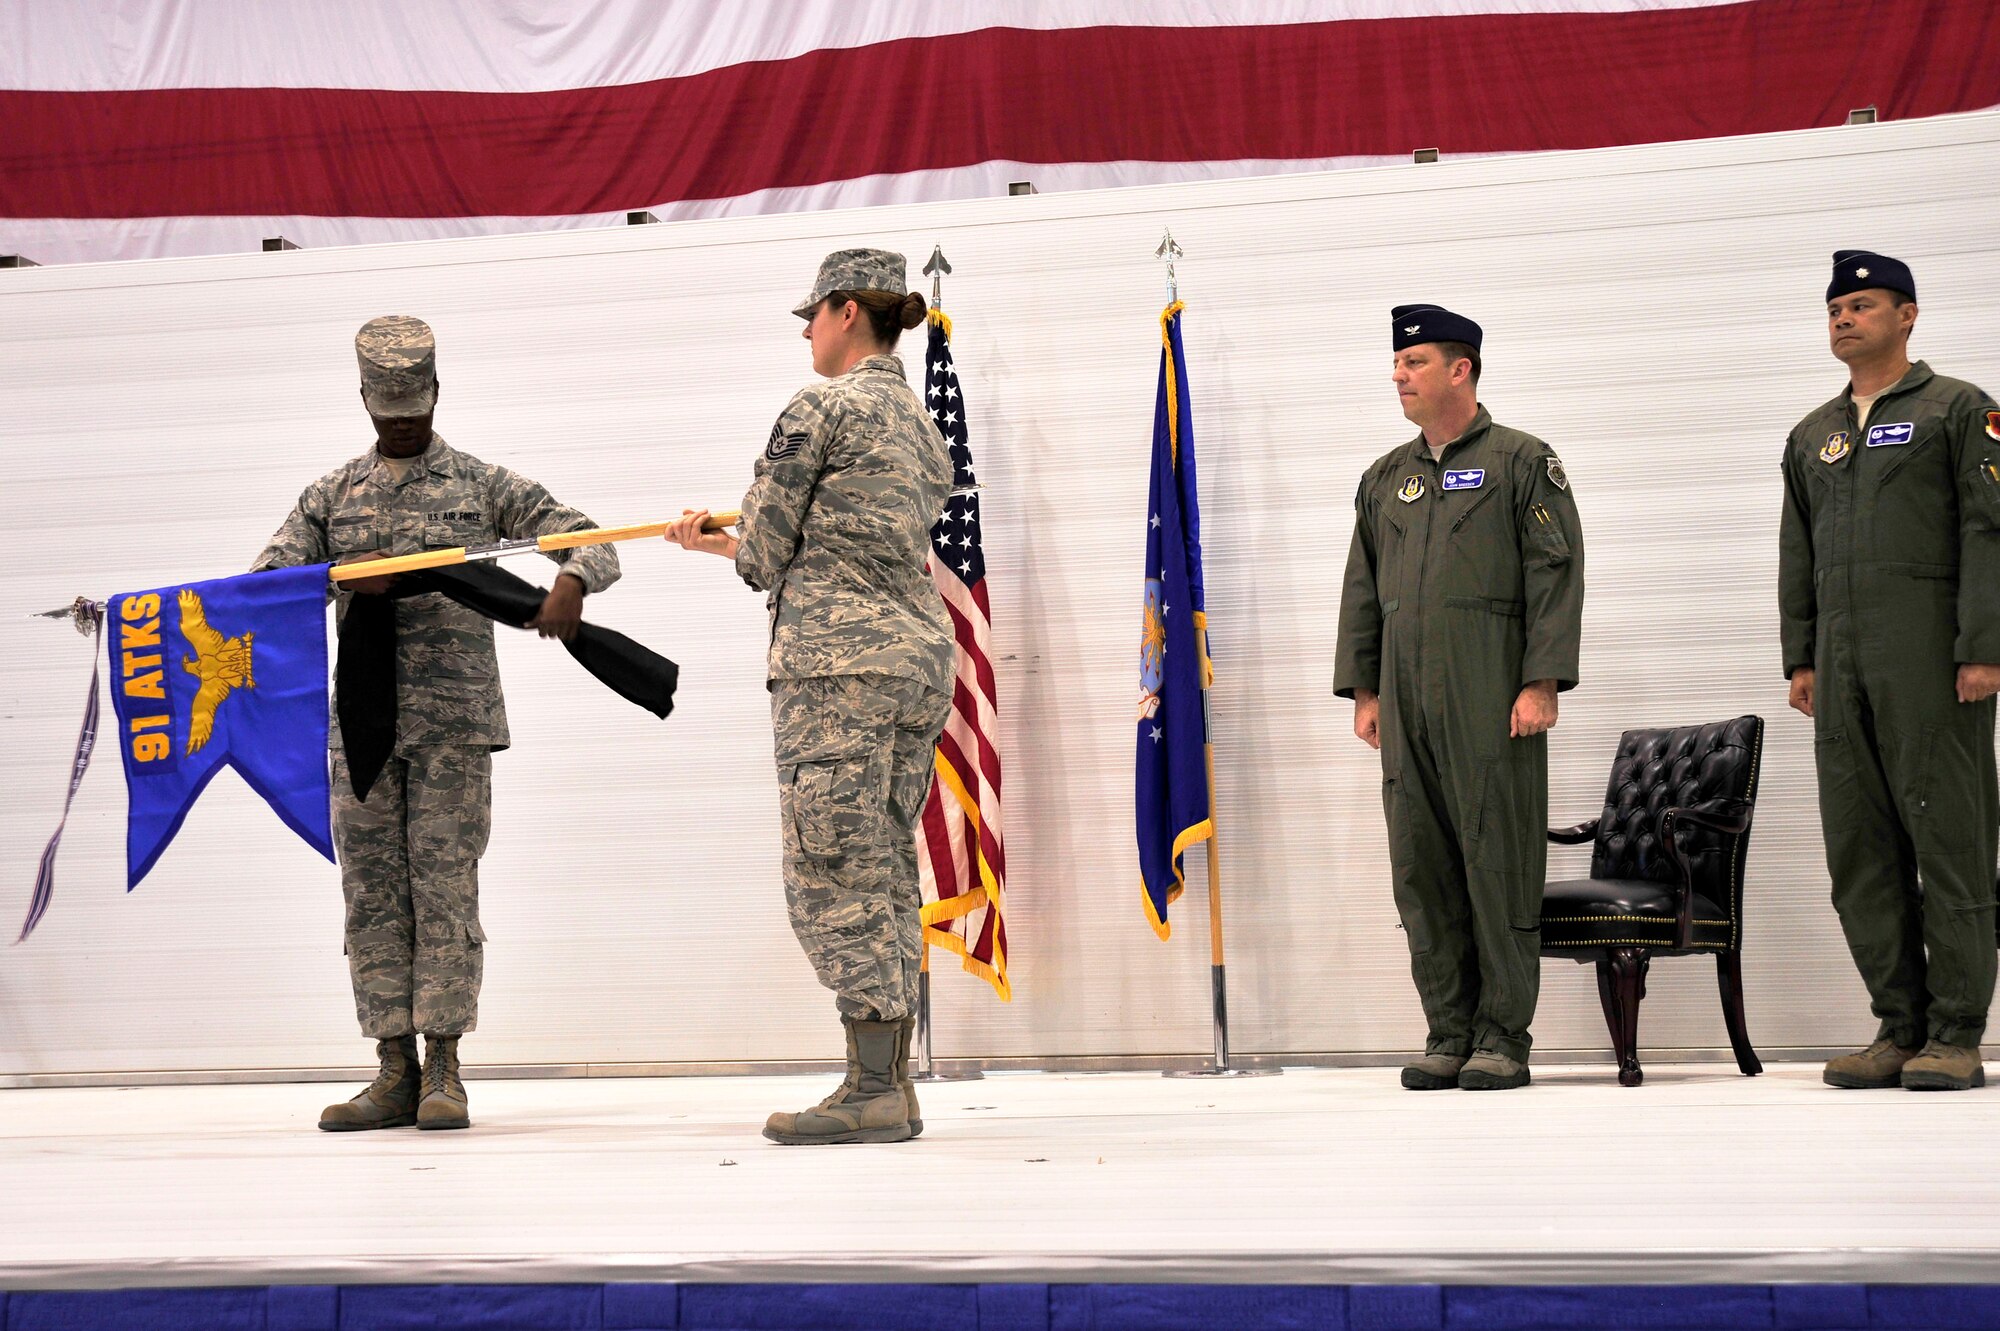 LAS VEGAS, Nev. – The 91st Attack Squadron acting first sergeant and members of the ceremonial team unfurl the 91st ATKS guidon during the squadron’s activation ceremony April 5, 2013. The squadron flies MQ-1B Predator and MQ-9 Reaper remotely piloted aircraft in support of national strategy. (U.S. Air Force photo by Senior Master Sgt. P.H.)